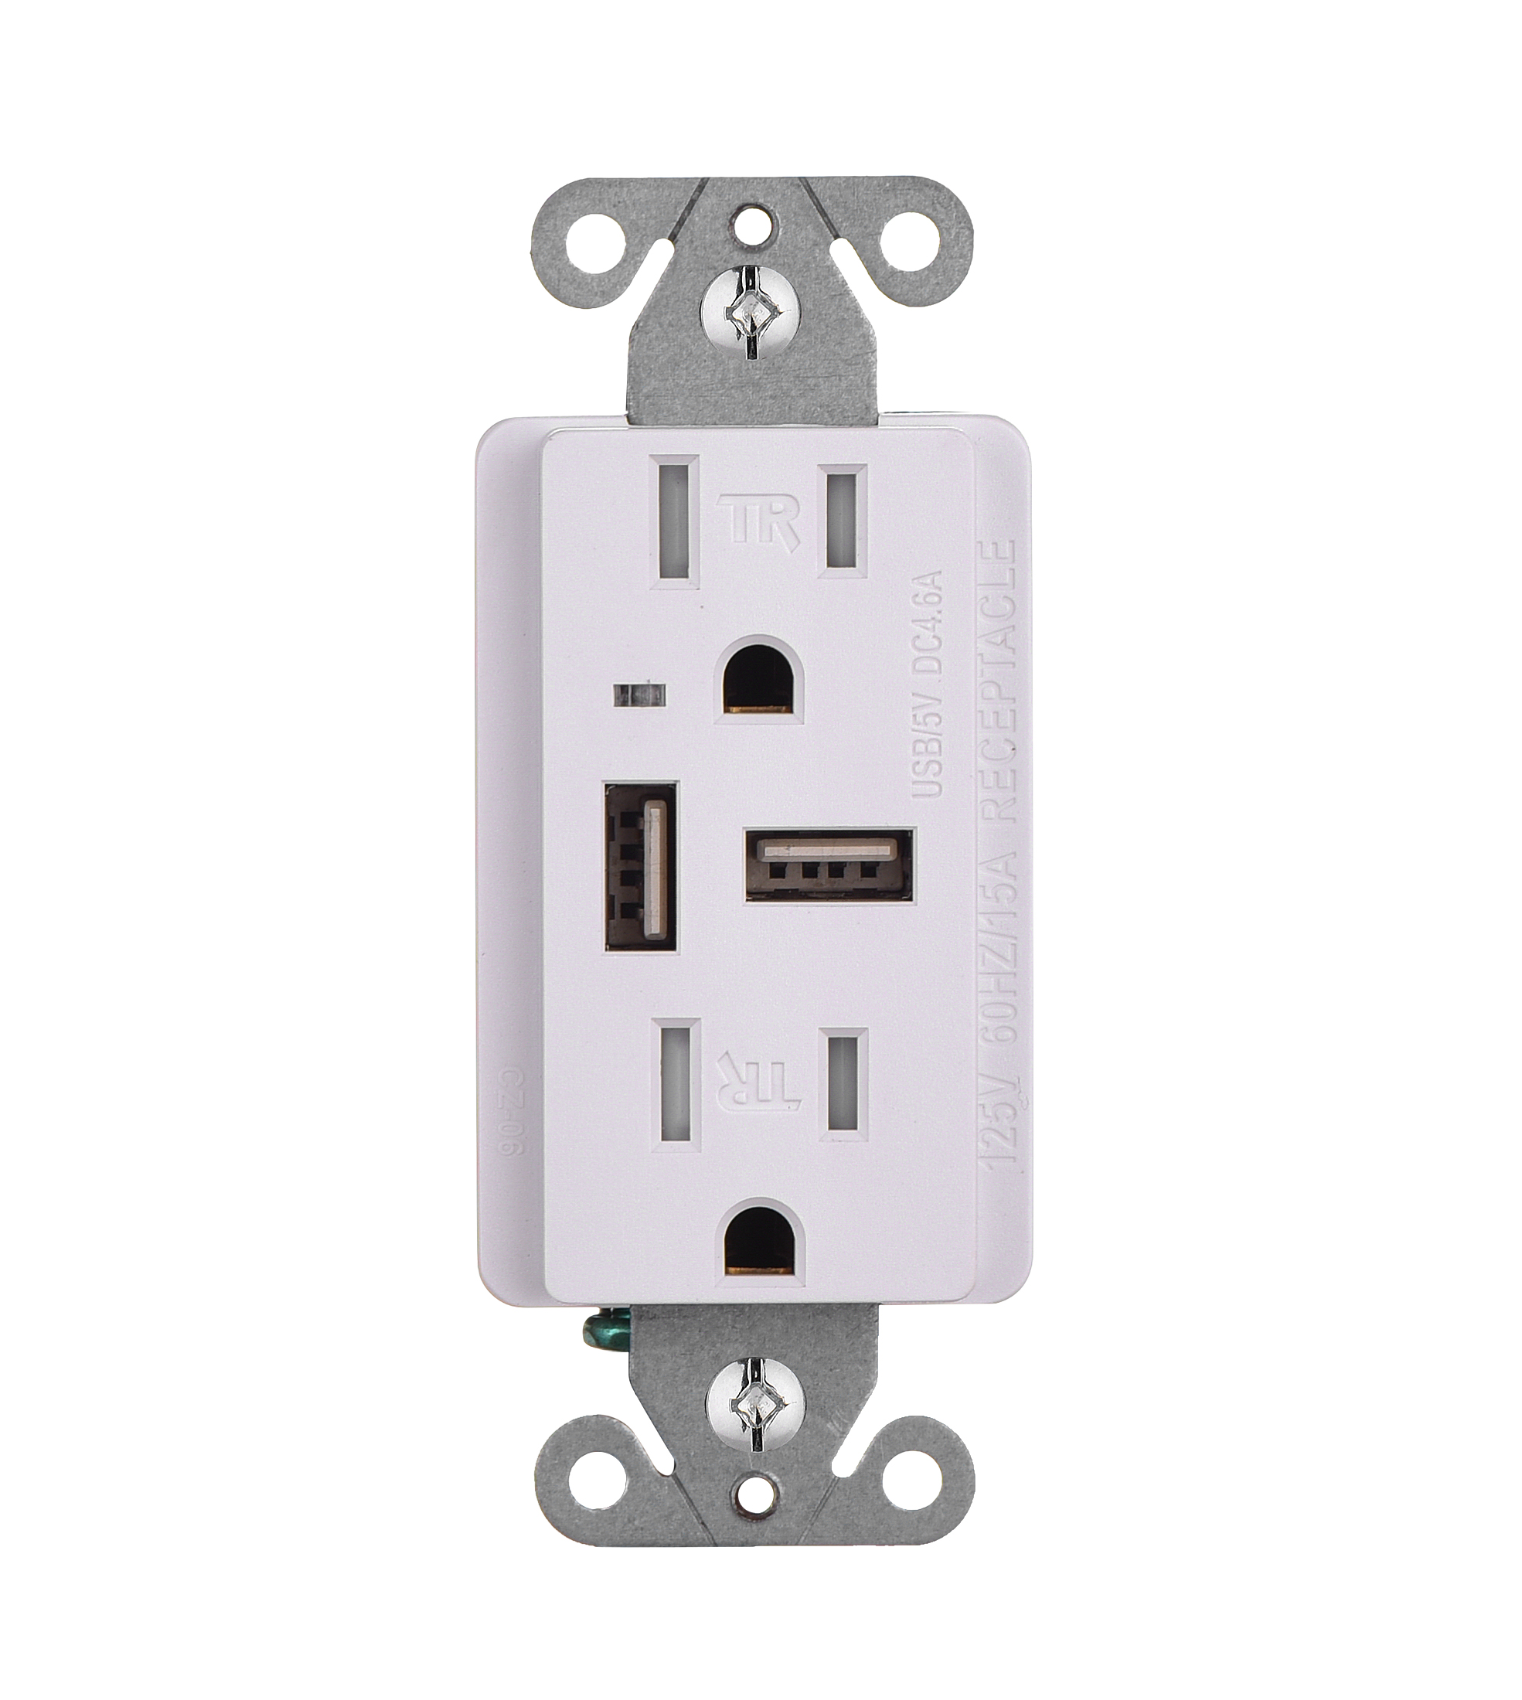 Good User Reputation for Inexpensive USB Outlets - USB Wall Outlets CZ-06 – Faith Electric